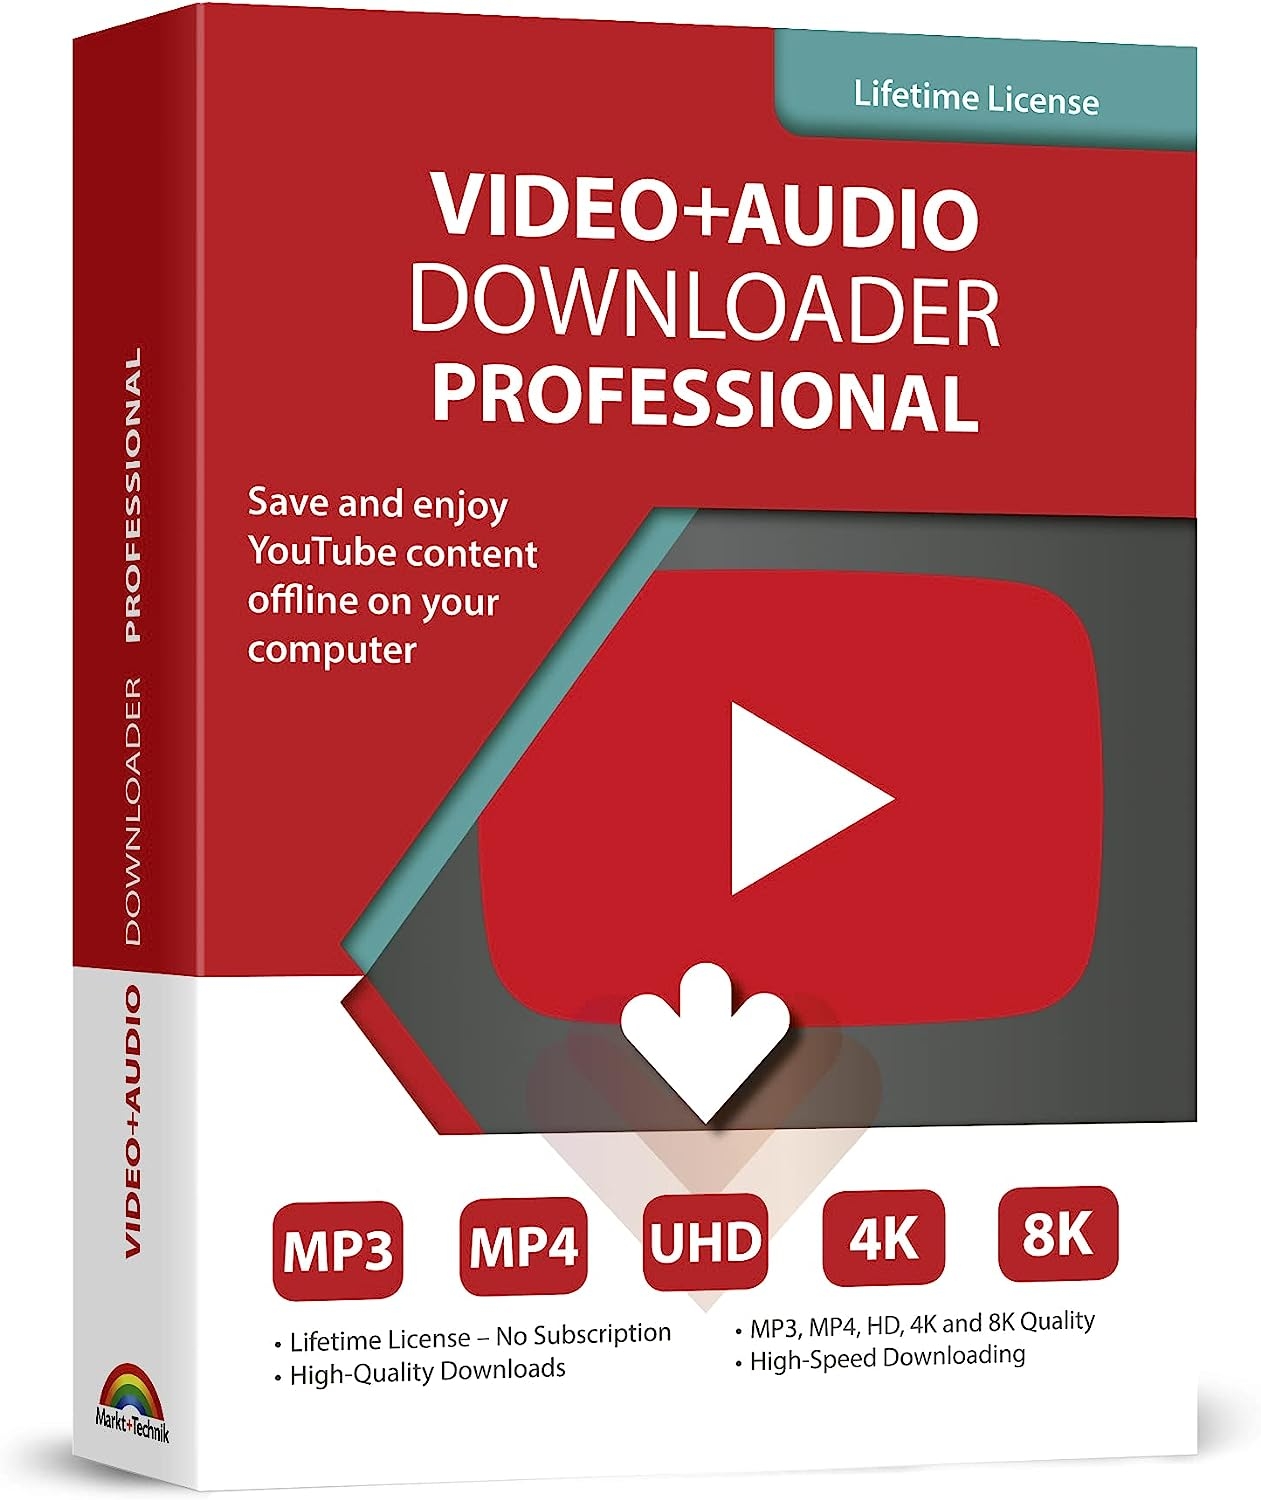 Video and Audio Downloader software for YouTube – download your favorite YouTube videos as MP4 video or MP3 audio – lifetime